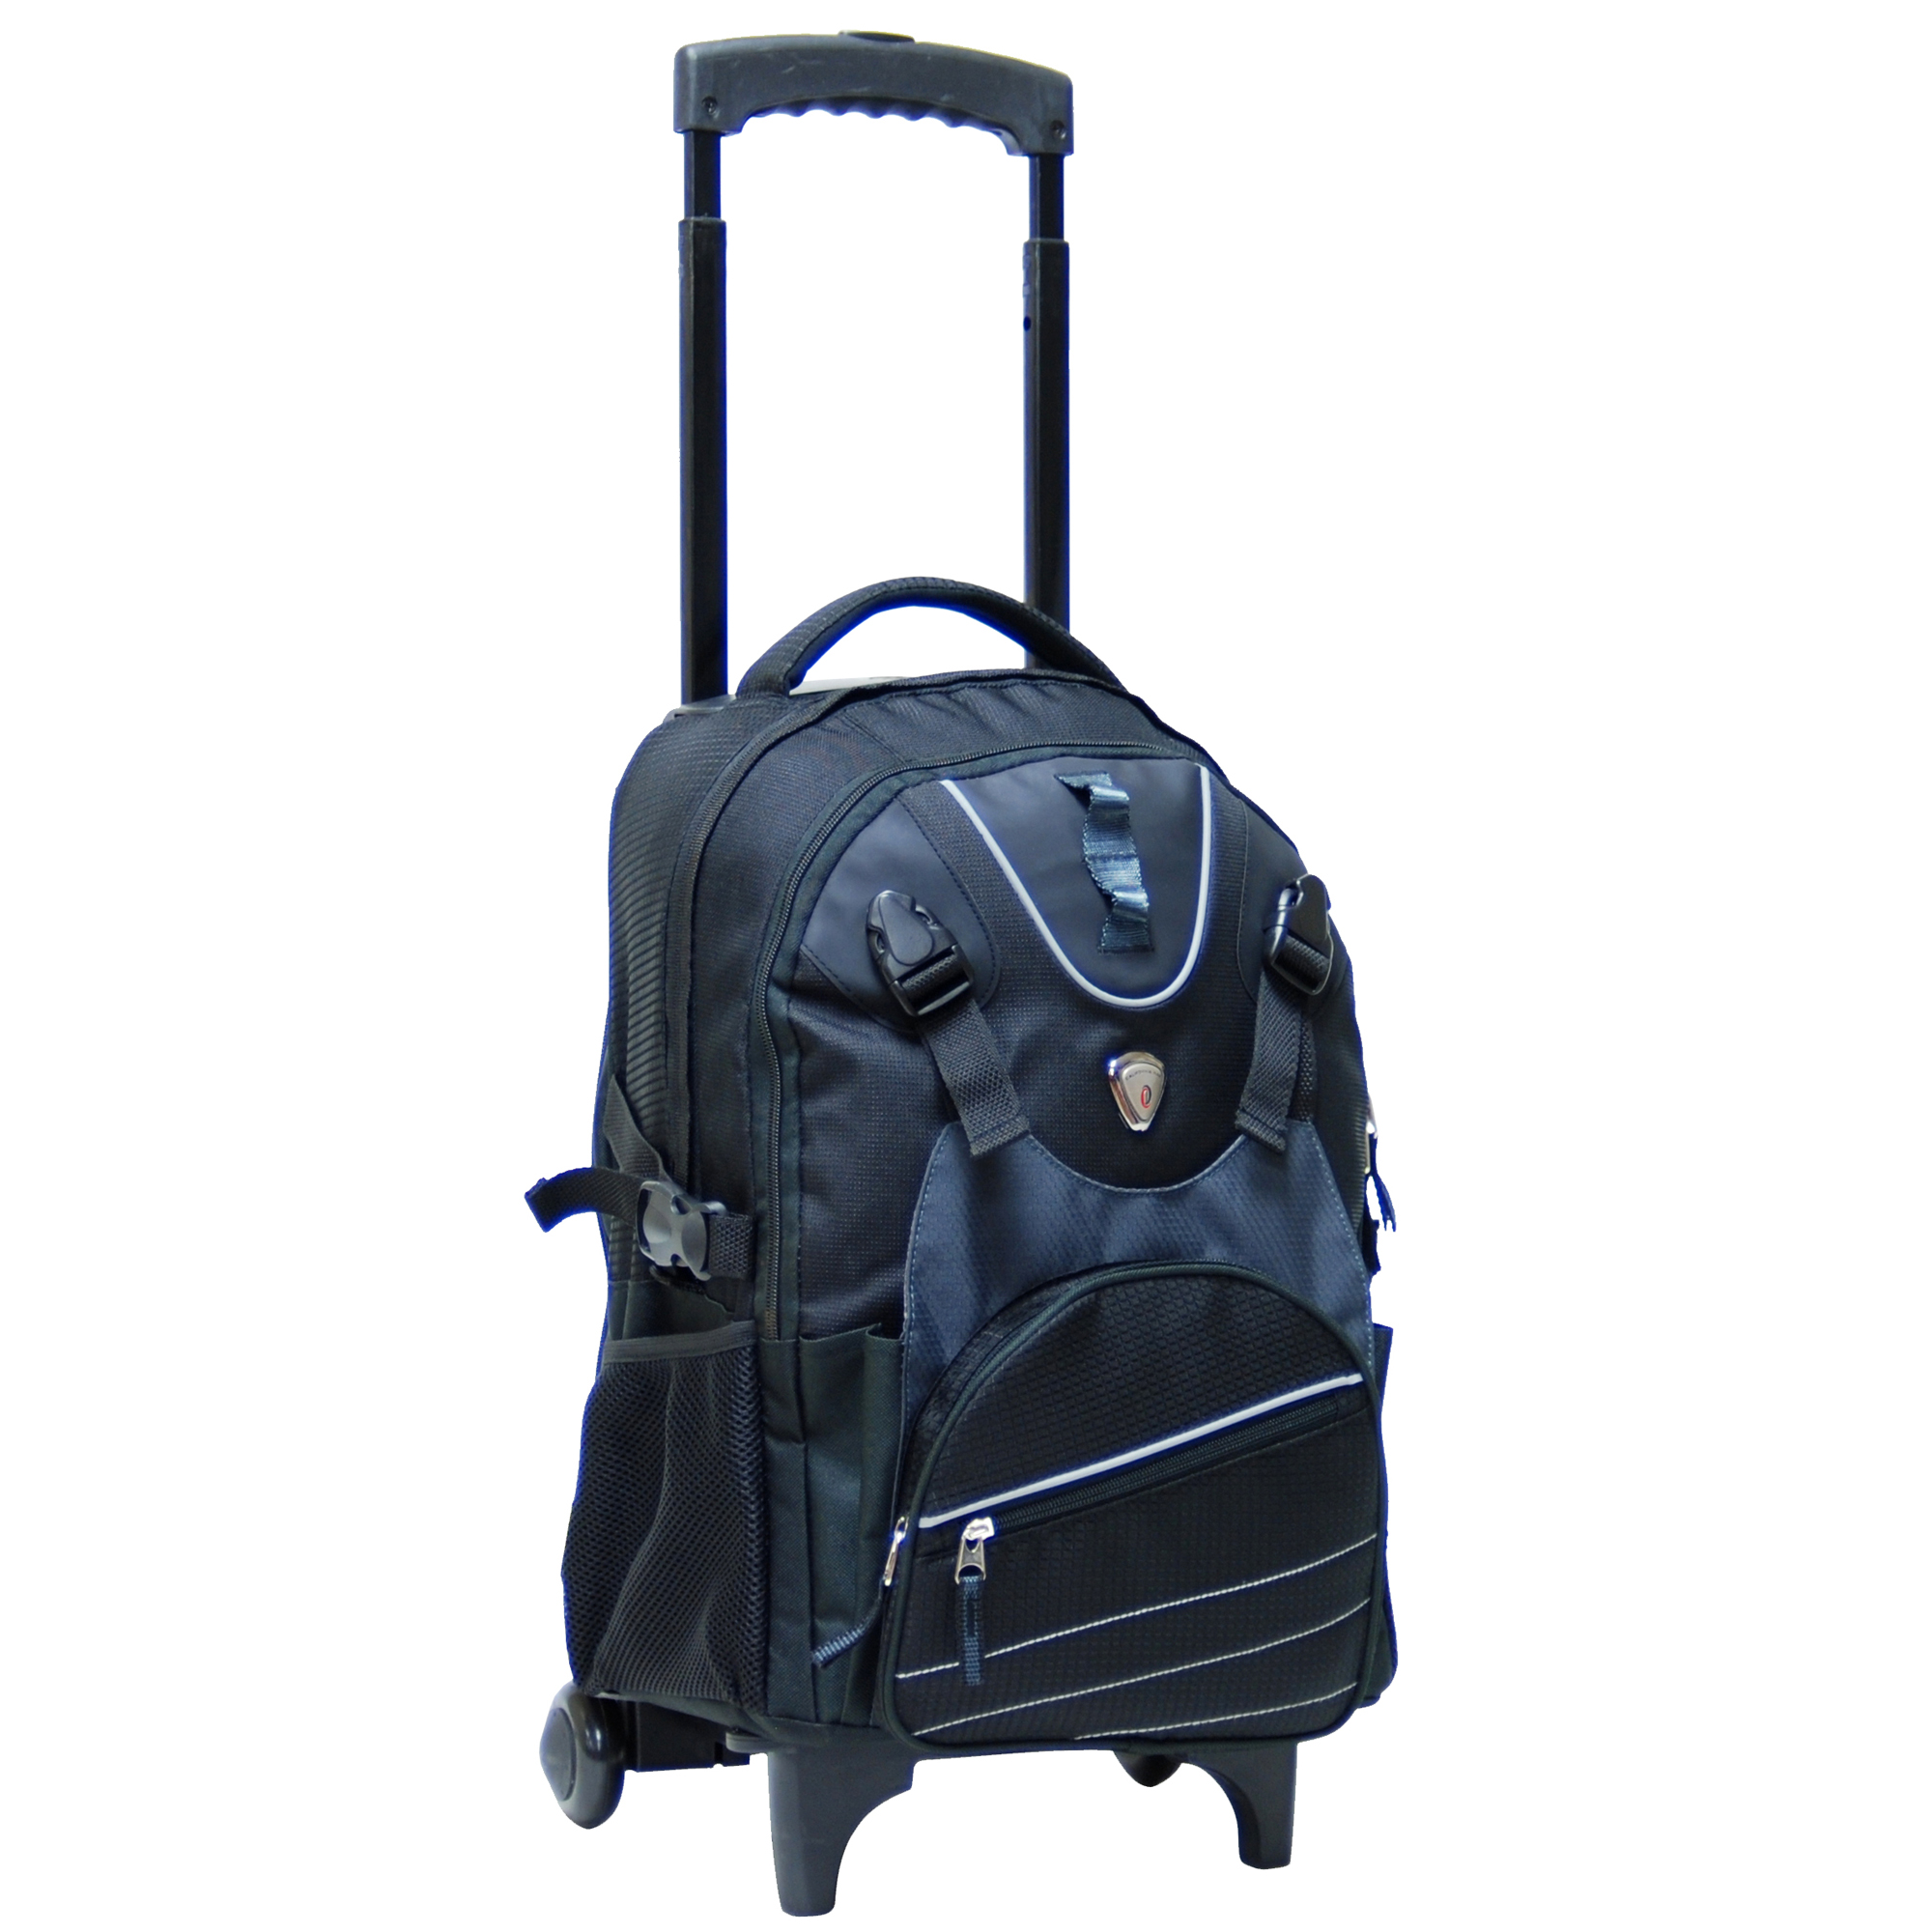 18" Deluxe Laptop Rolling Backpack (Champion)